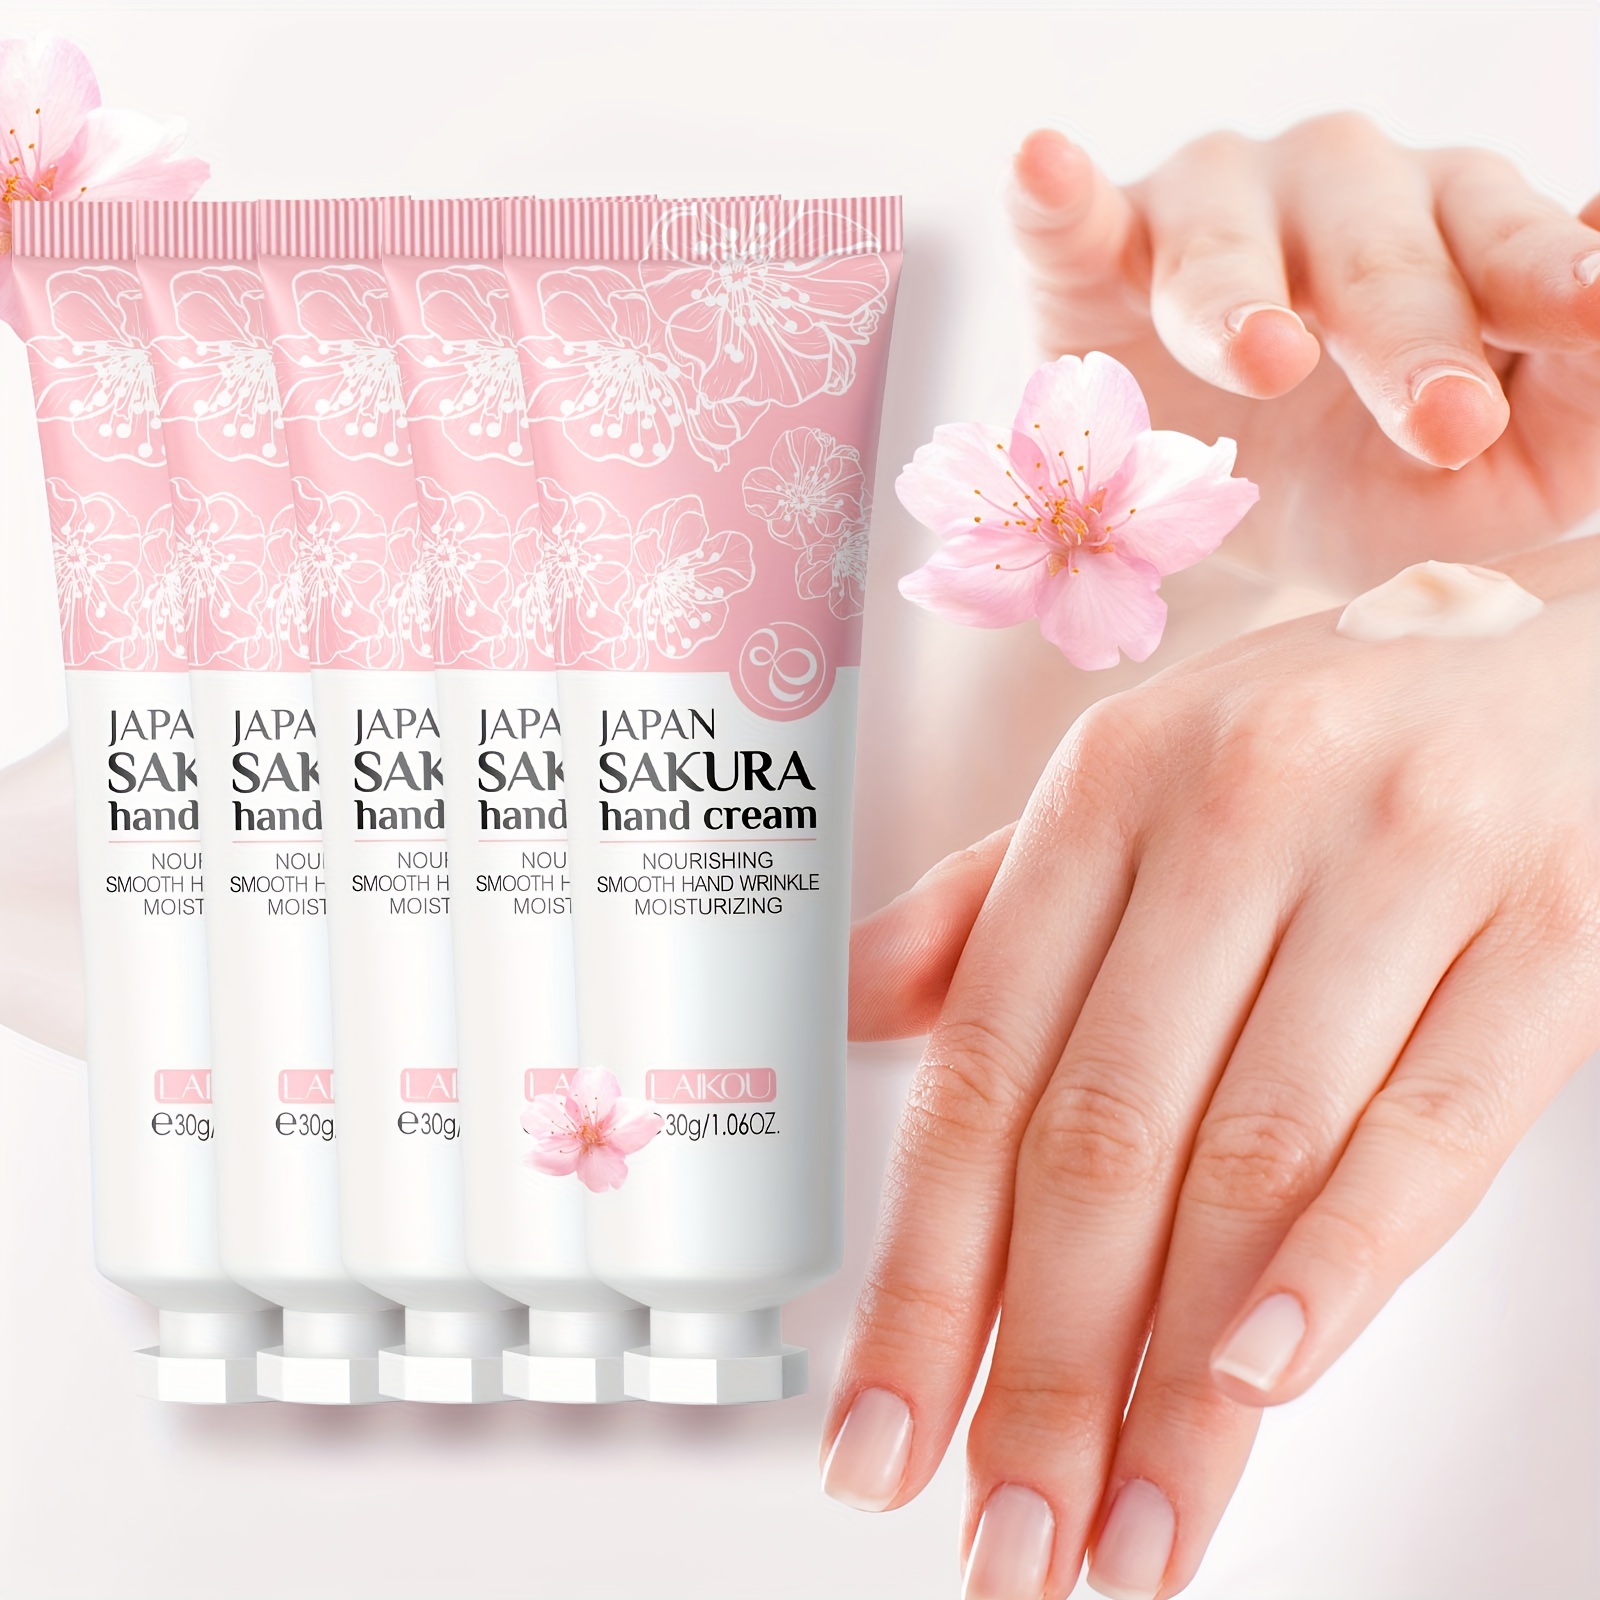 

5pcs/set Sakura Hand Cream For Dry Cracked Hands, Deeply Moisturizing Hand Lotion Travel Size, Bridesmaid Gifts, Hand Moisturizer, Gift For Women